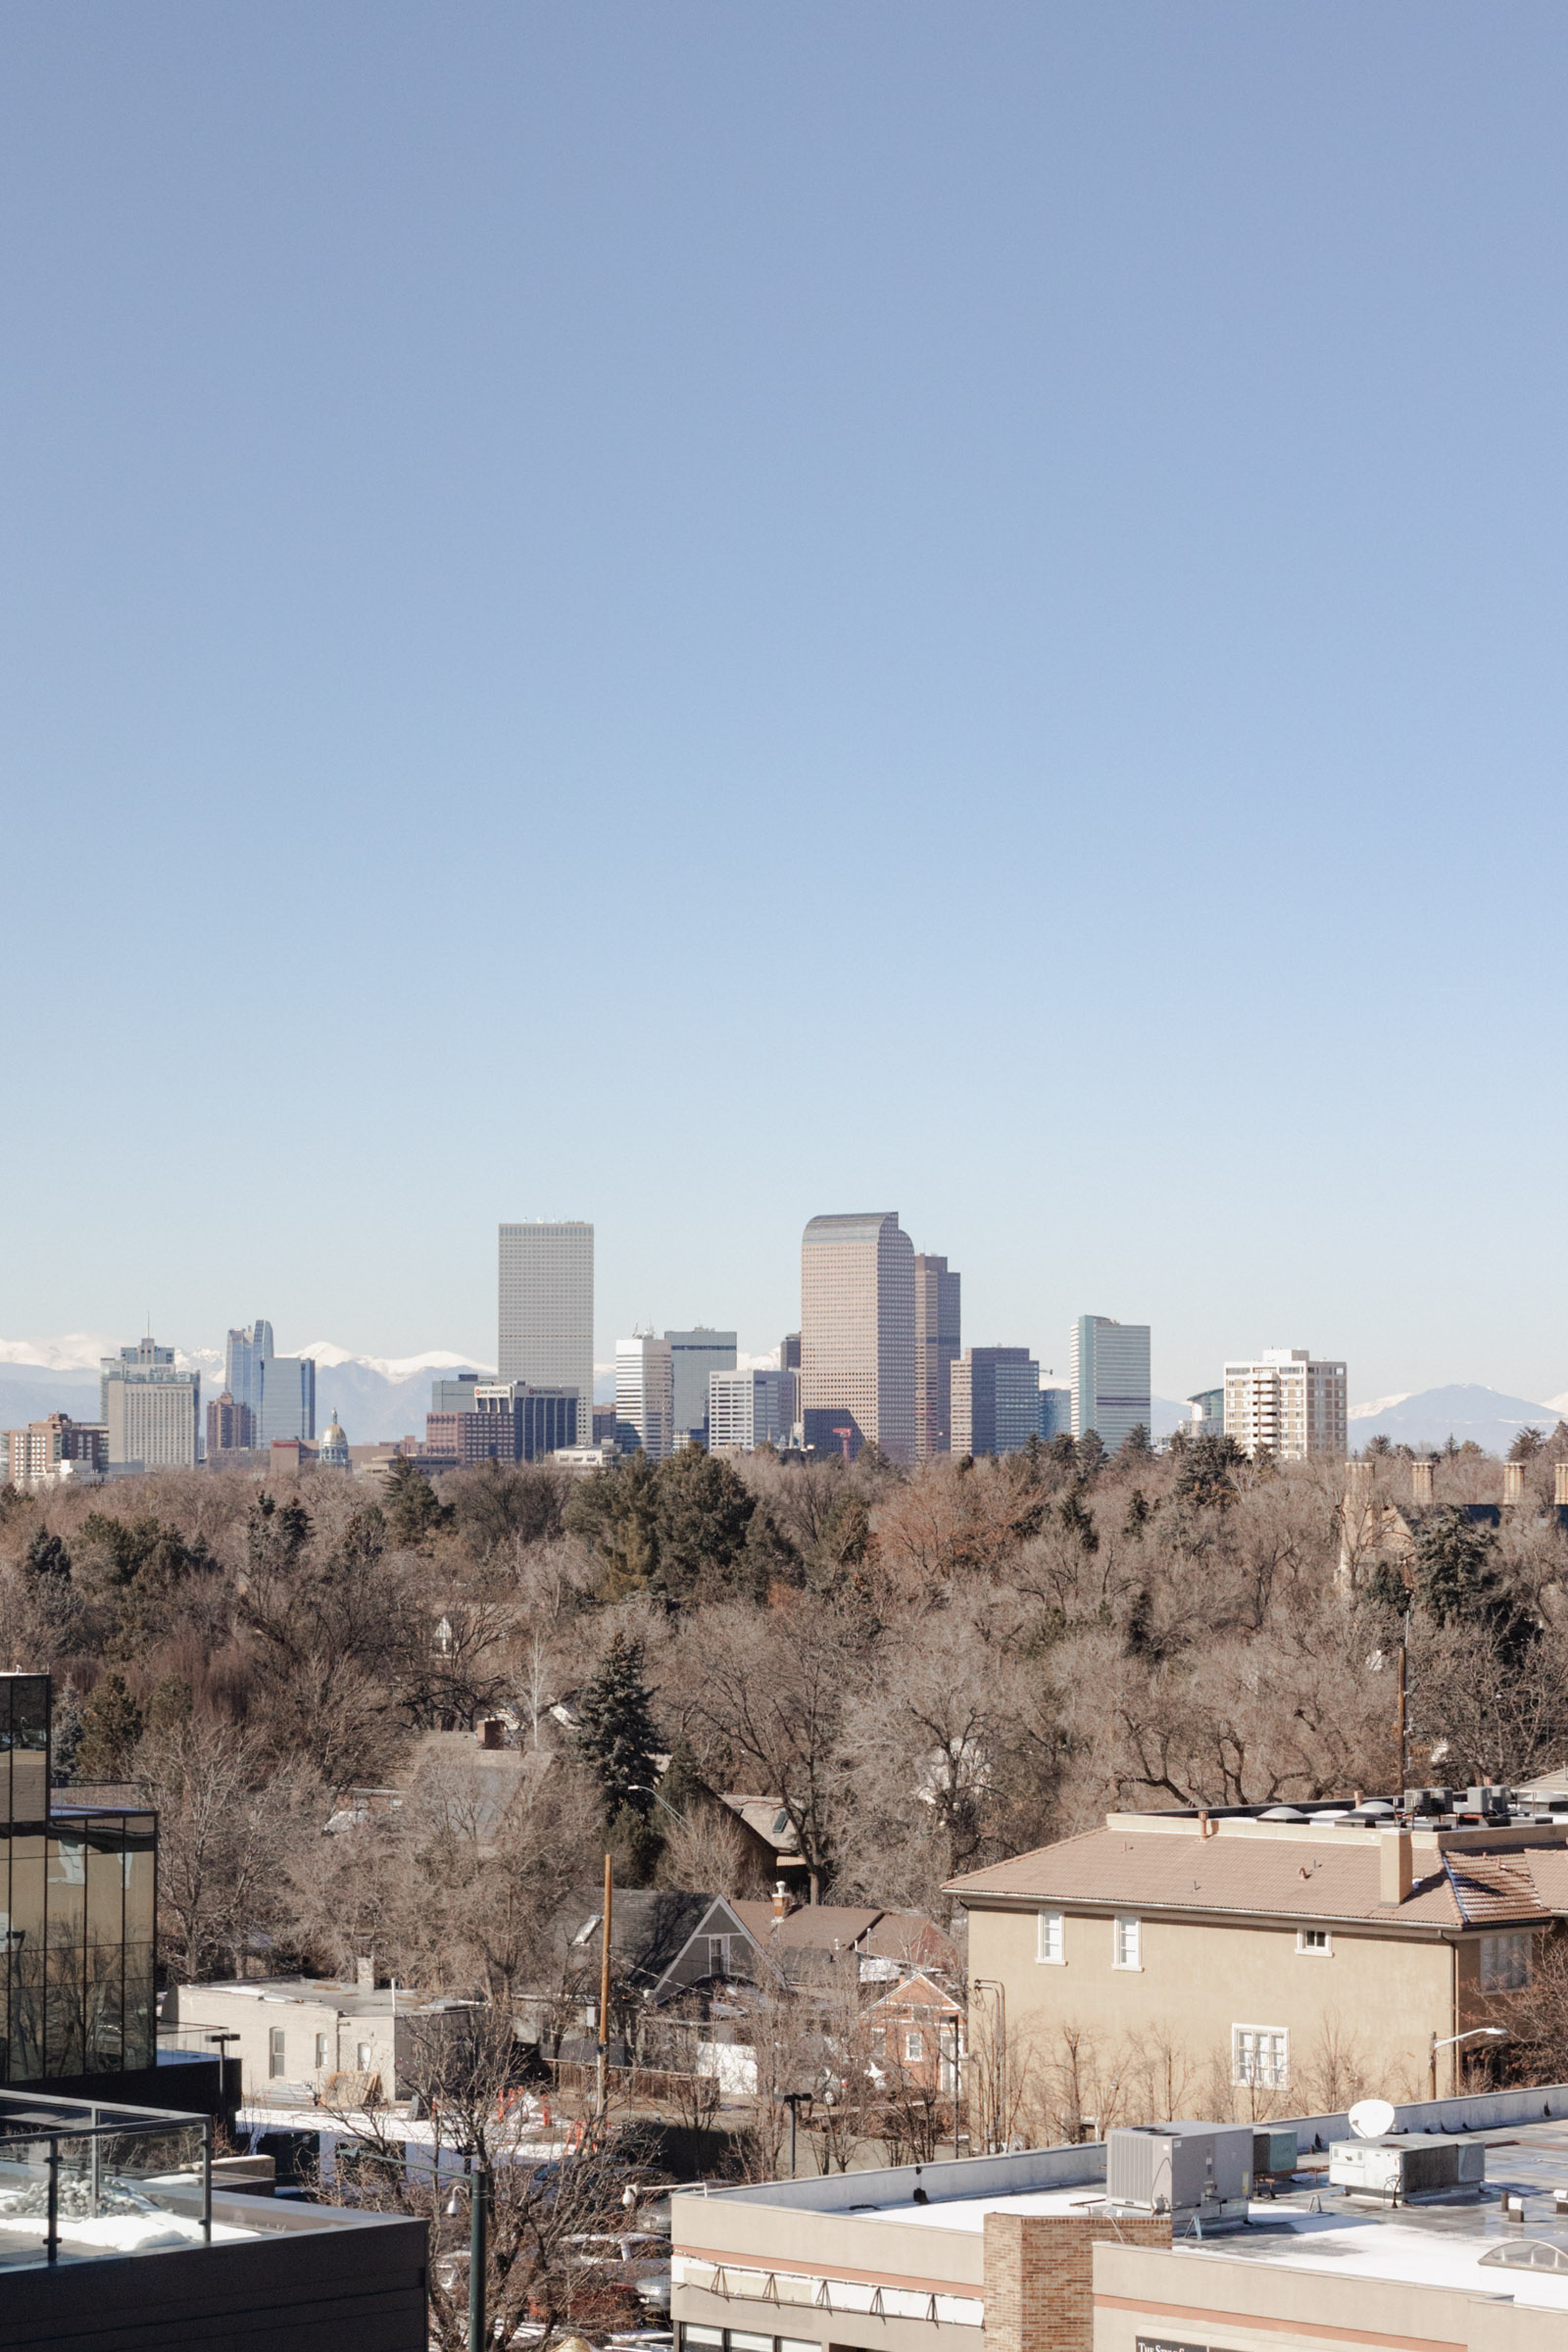 Skyline of Denver, Colorado city with Rocky Mountains in backdrop from Denver Halcyon Hotel